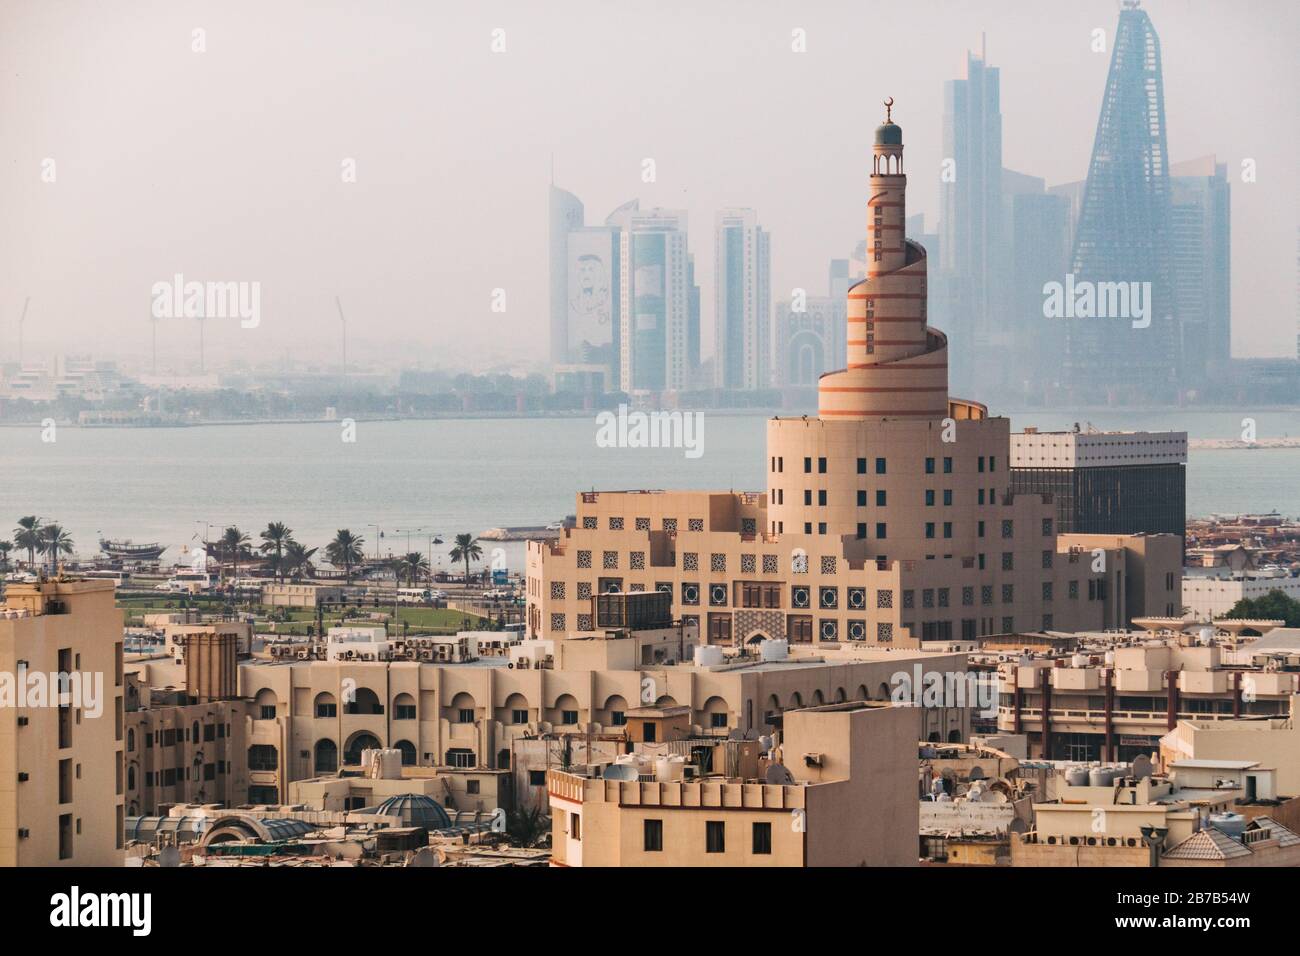 The famous spiral mosque of the Kassem Darwish Fakhroo Islamic Centre near Souq Waqif in Doha, Qatar. The city skyline can be seen behind in the haze Stock Photo